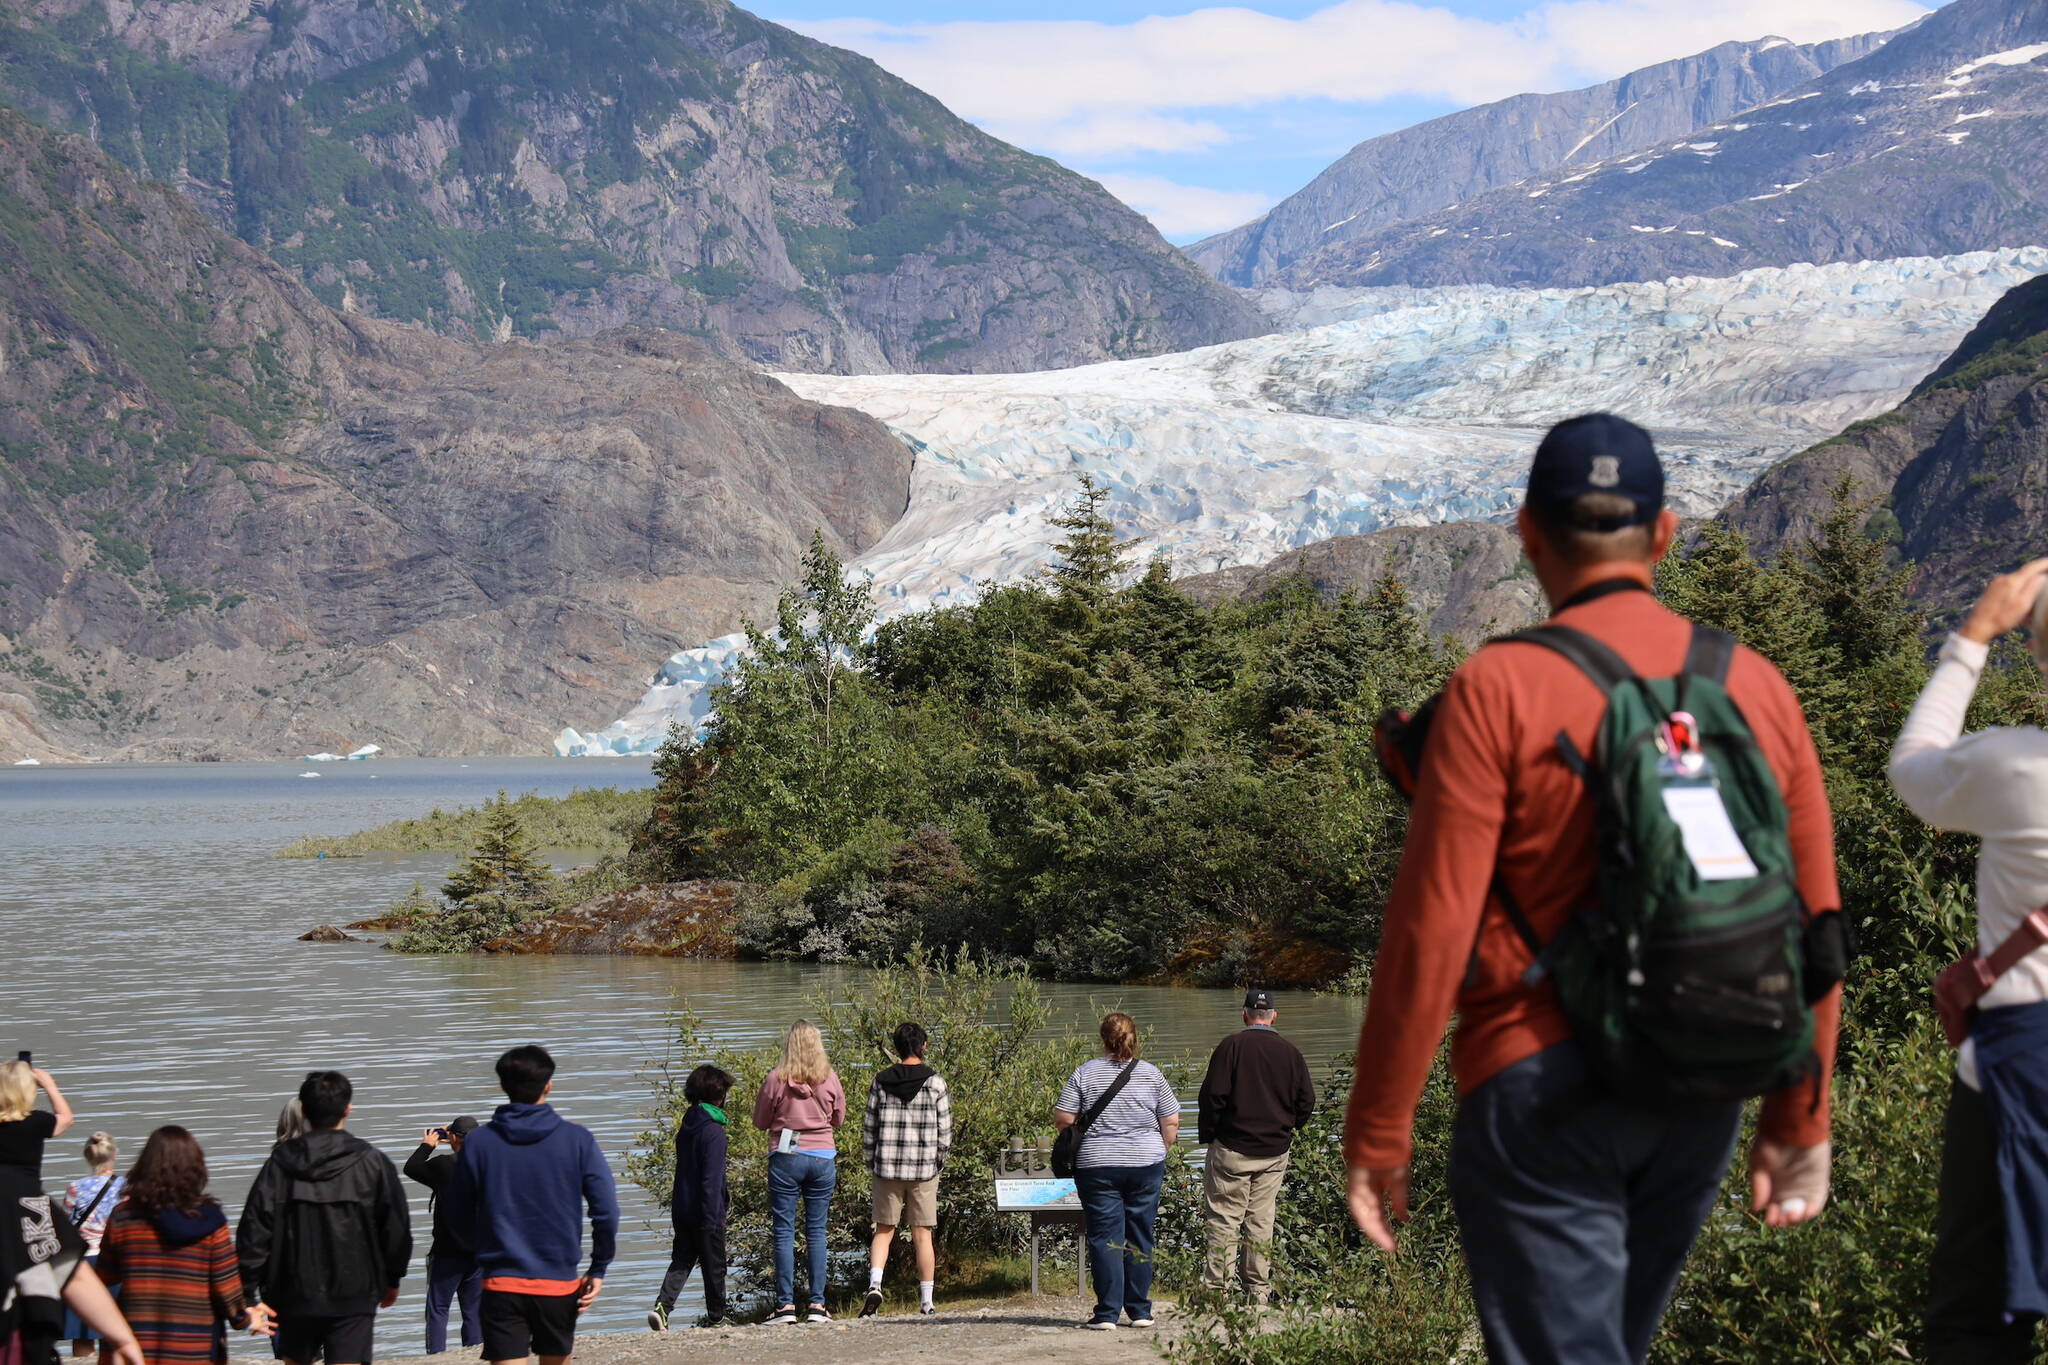 Clarise Larson / Juneau Empire
Visitors look at the Mendenhall Glacier near the Mendenhall Glacier Visitor Center in August.